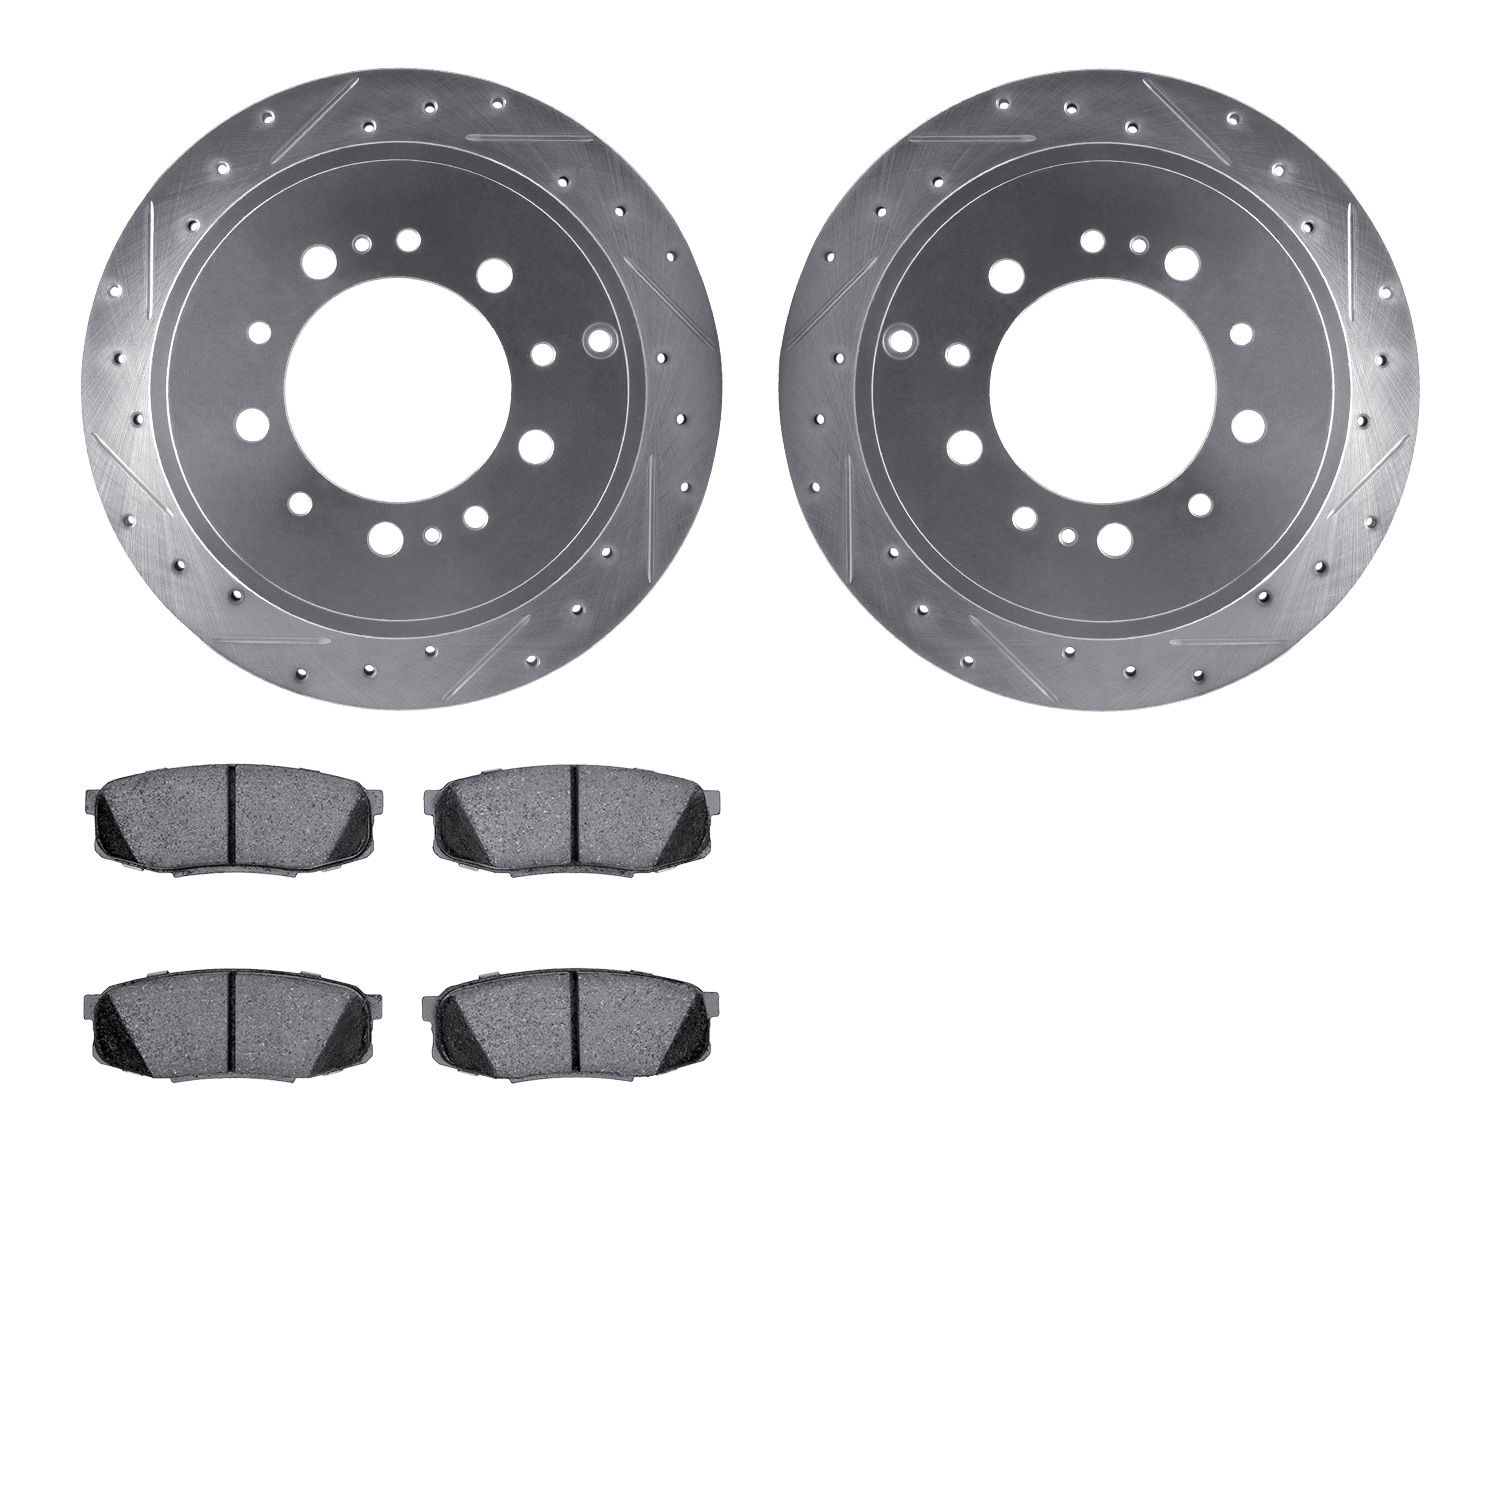 7402-76021 Drilled/Slotted Brake Rotors with Ultimate-Duty Brake Pads Kit [Silver], Fits Select Lexus/Toyota/Scion, Position: Re